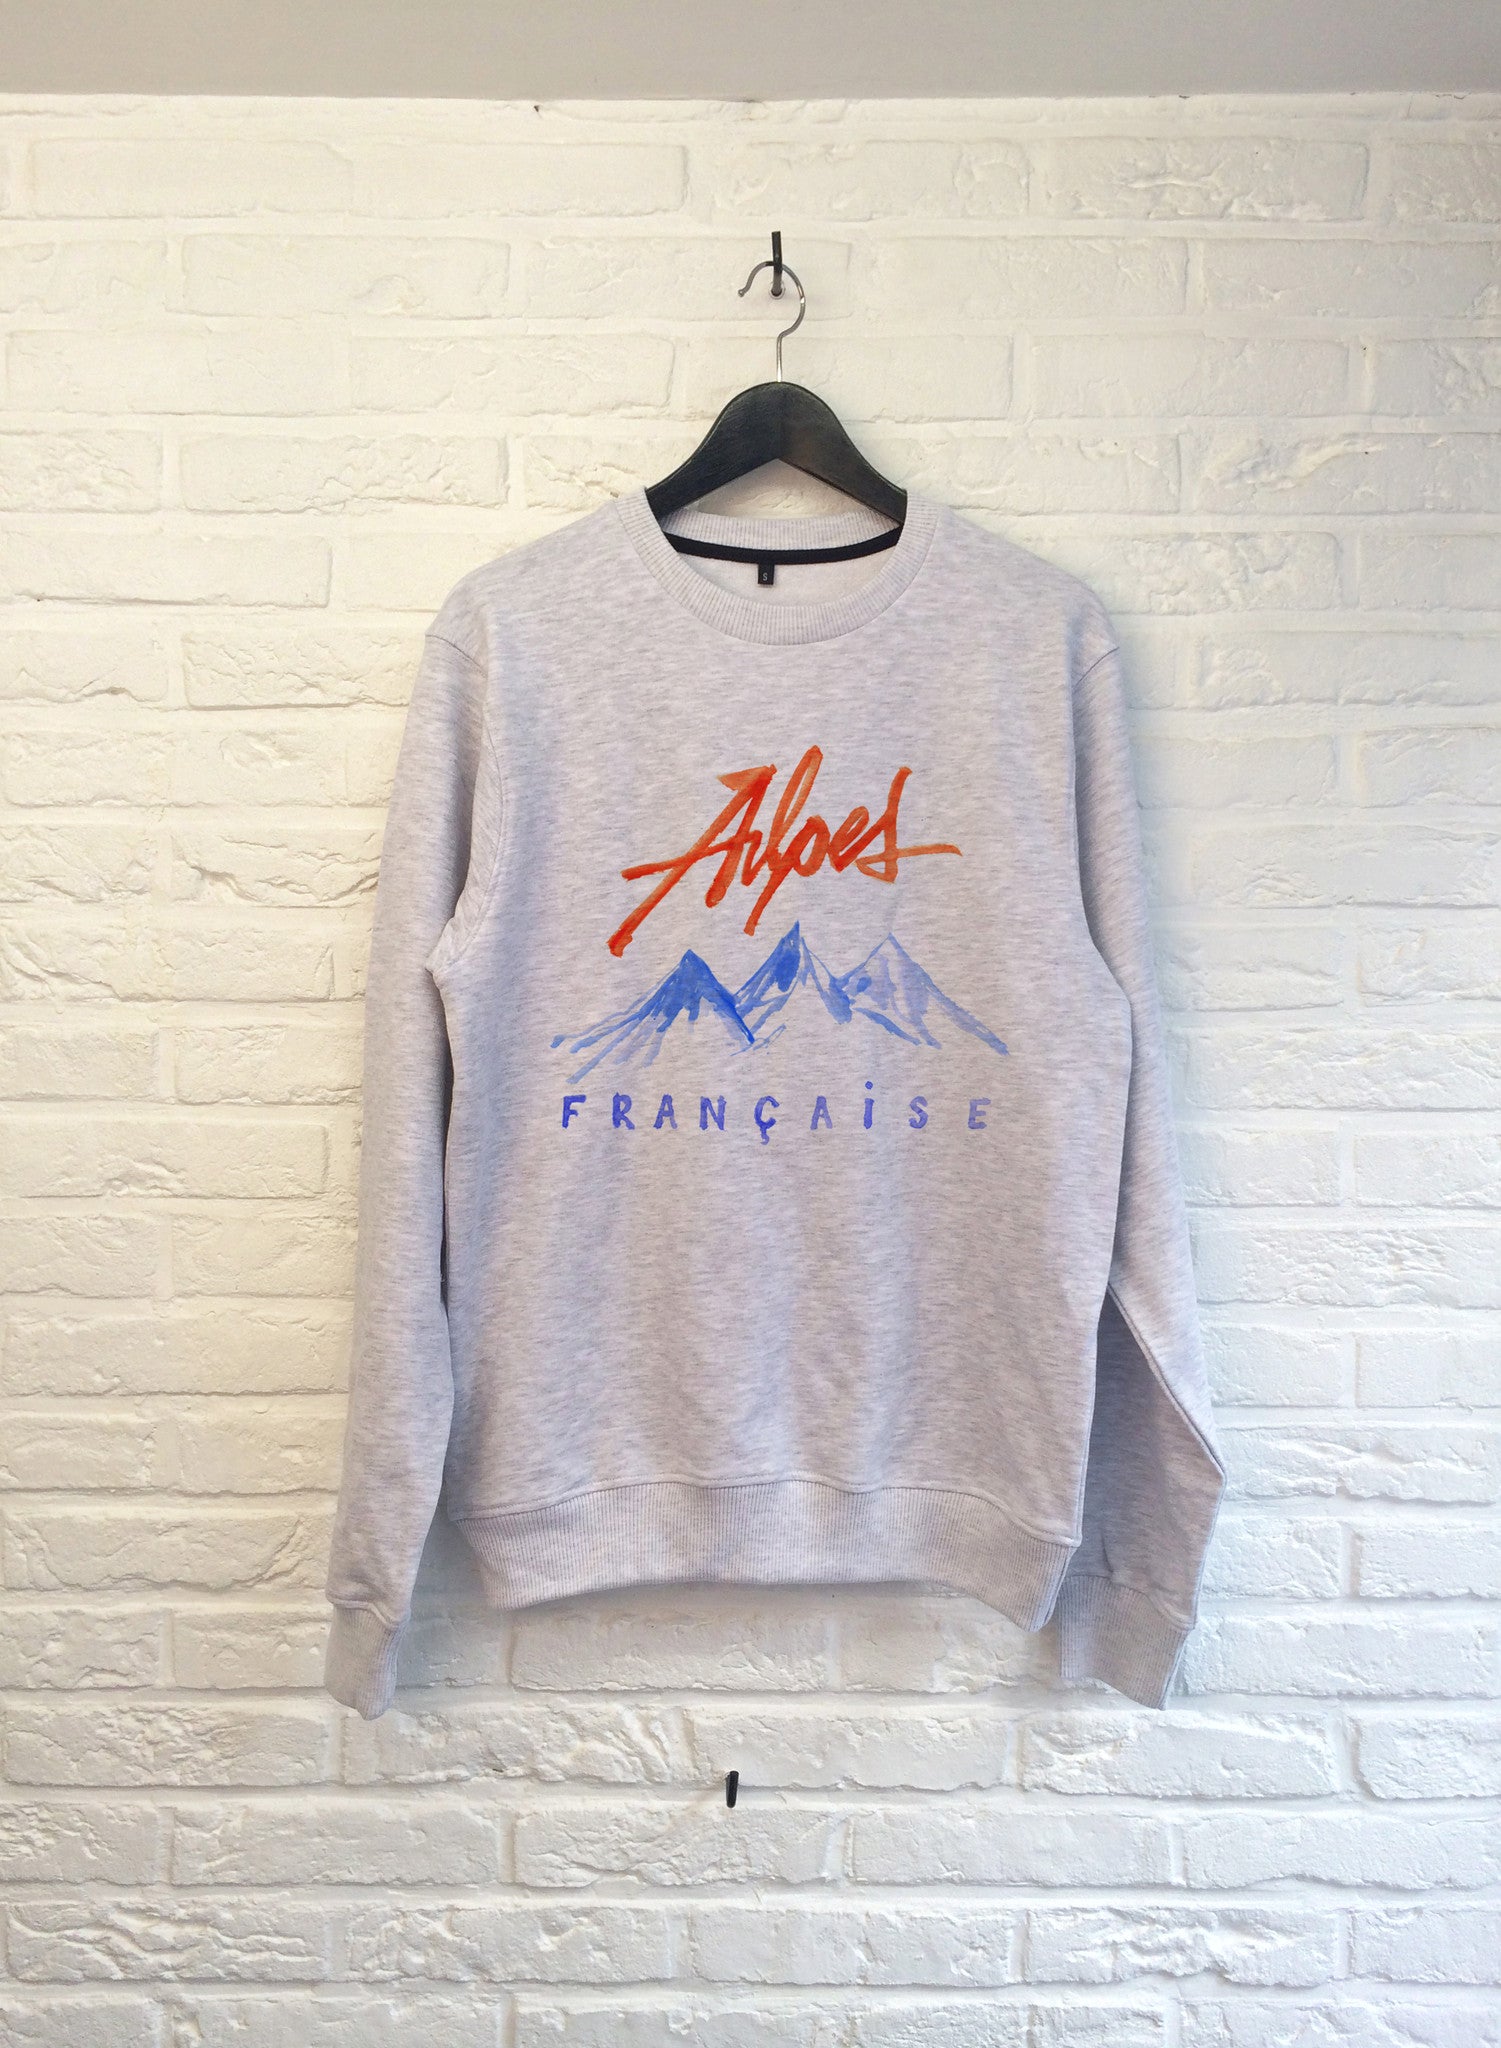 TH Gallery - Alpes Française - Sweat-Sweat shirts-Atelier Amelot